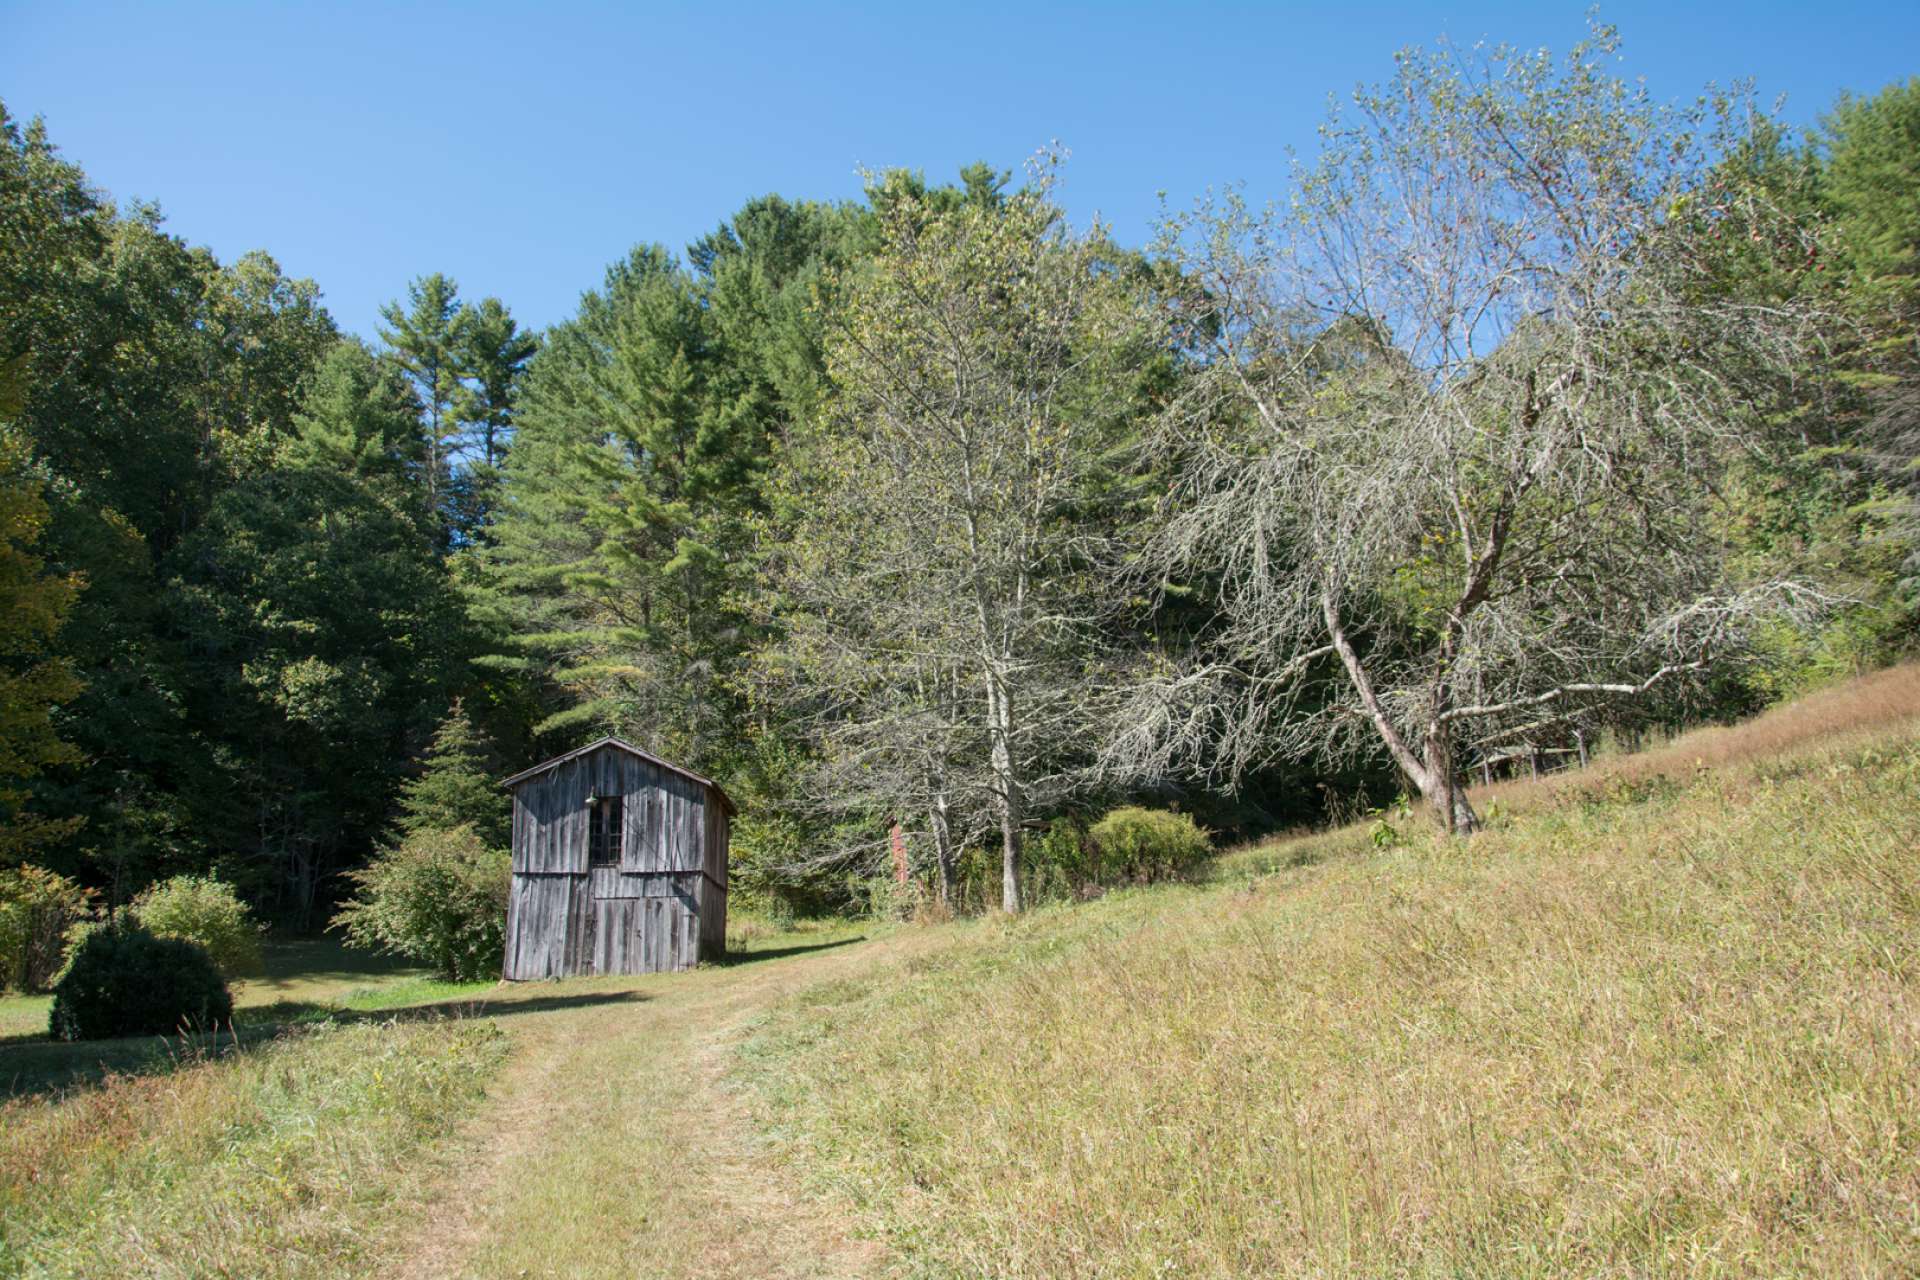 Travel on down the private country lane leading to the vintage 2-bedroom, 1-bath farmhouse.